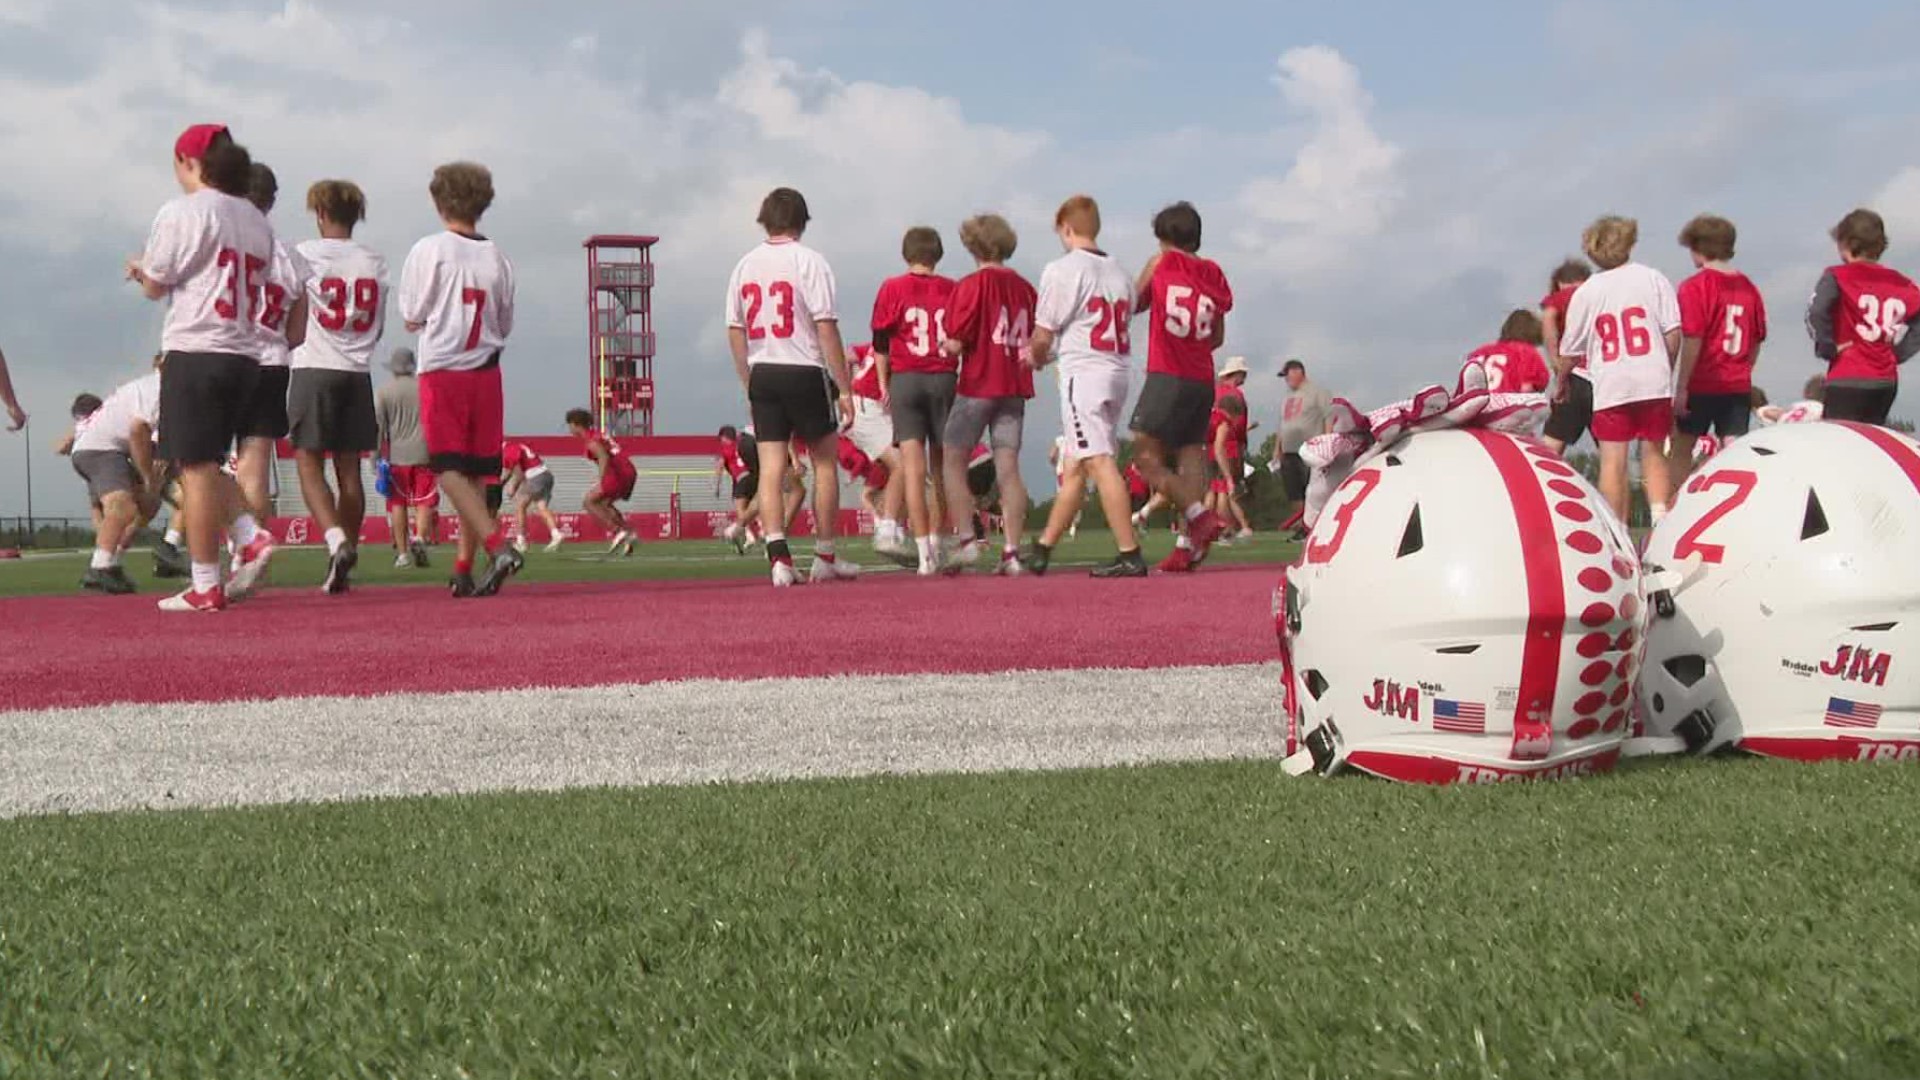 The Center Grove Trojans have their sights set on a return trip to Lucas Oil Stadium.